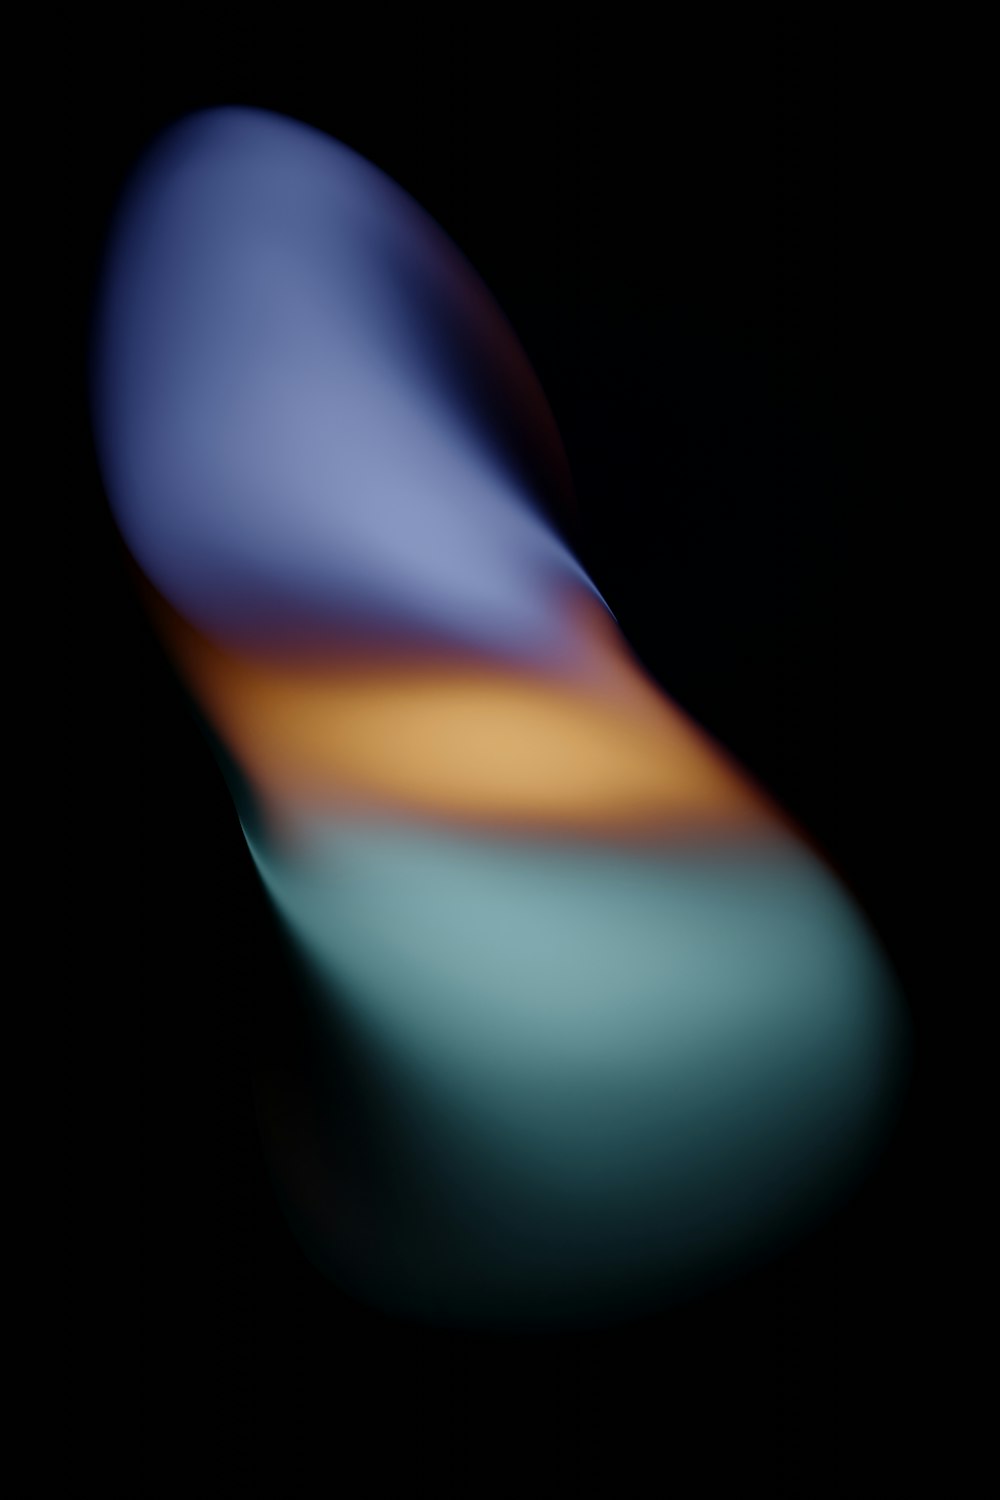 a blurry image of a blue and orange object